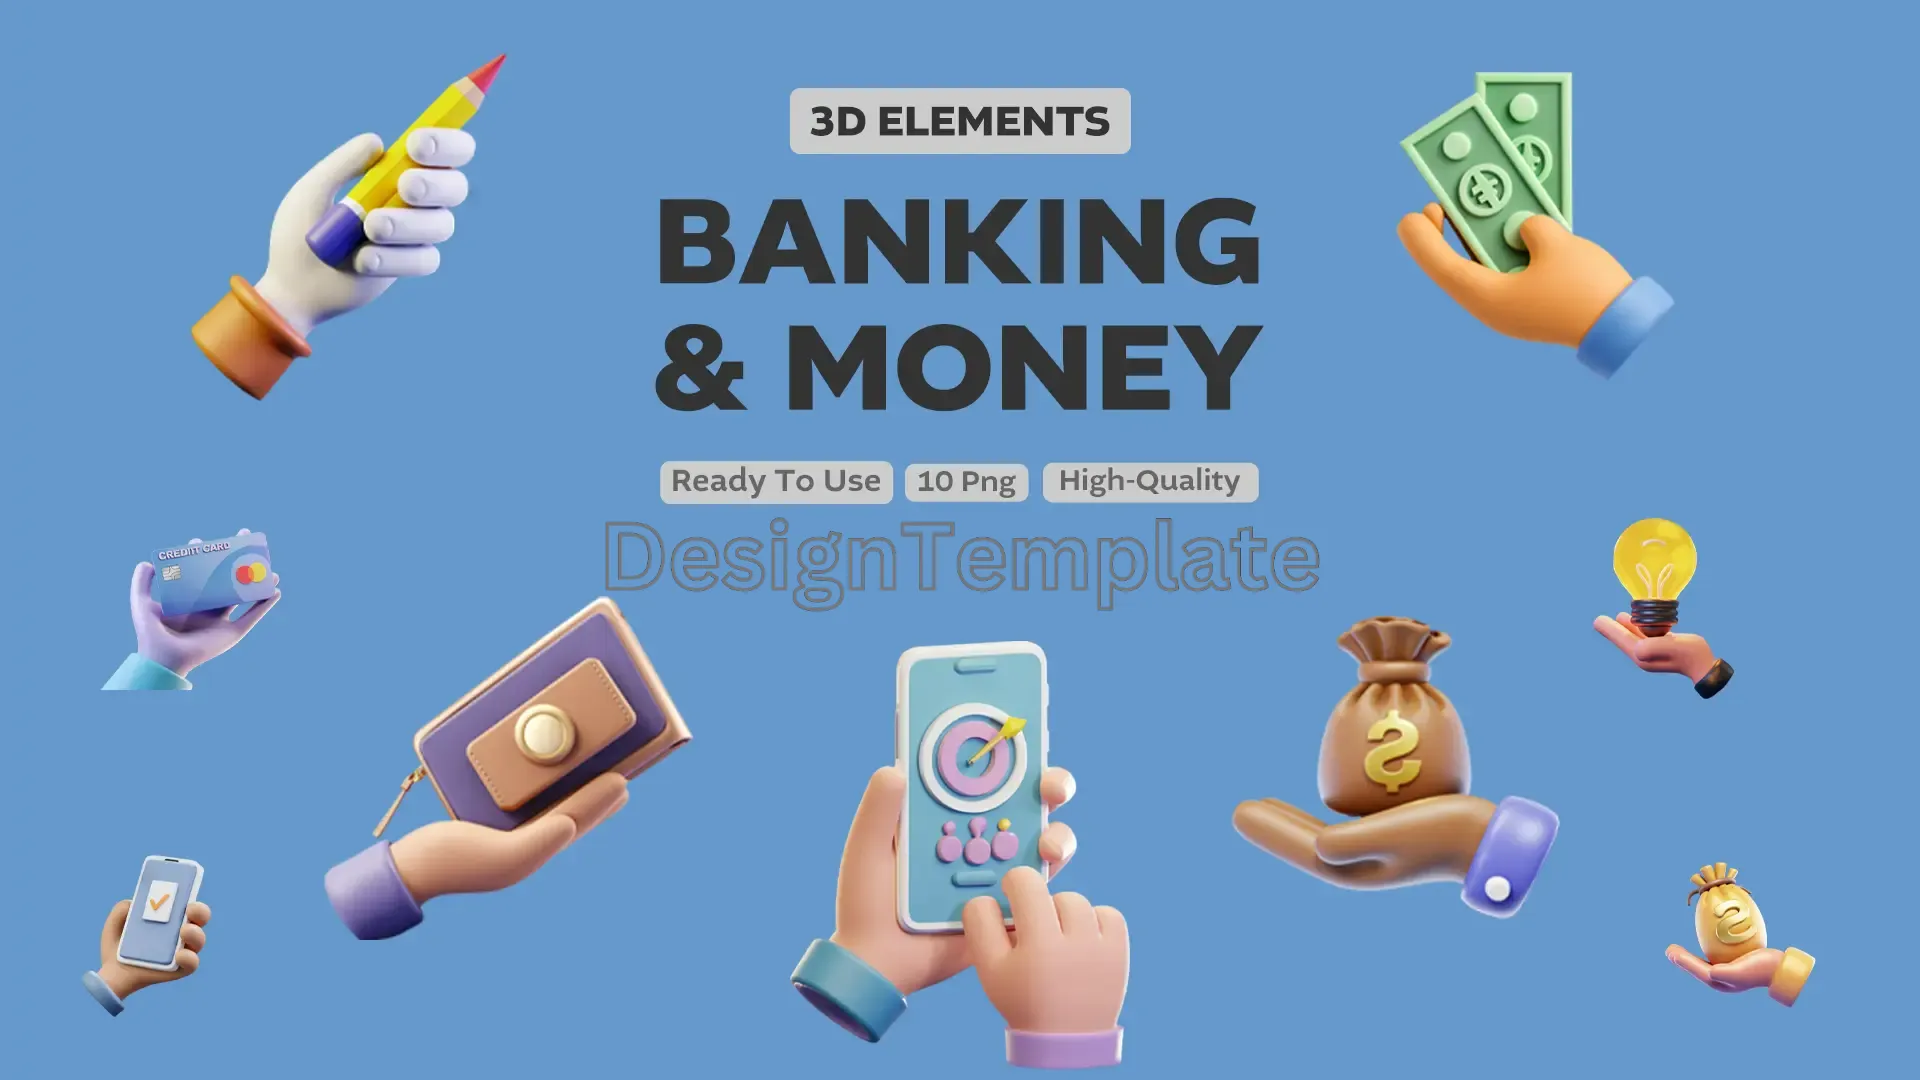 Fiscal Features Exquisite 3D Banking Elements image